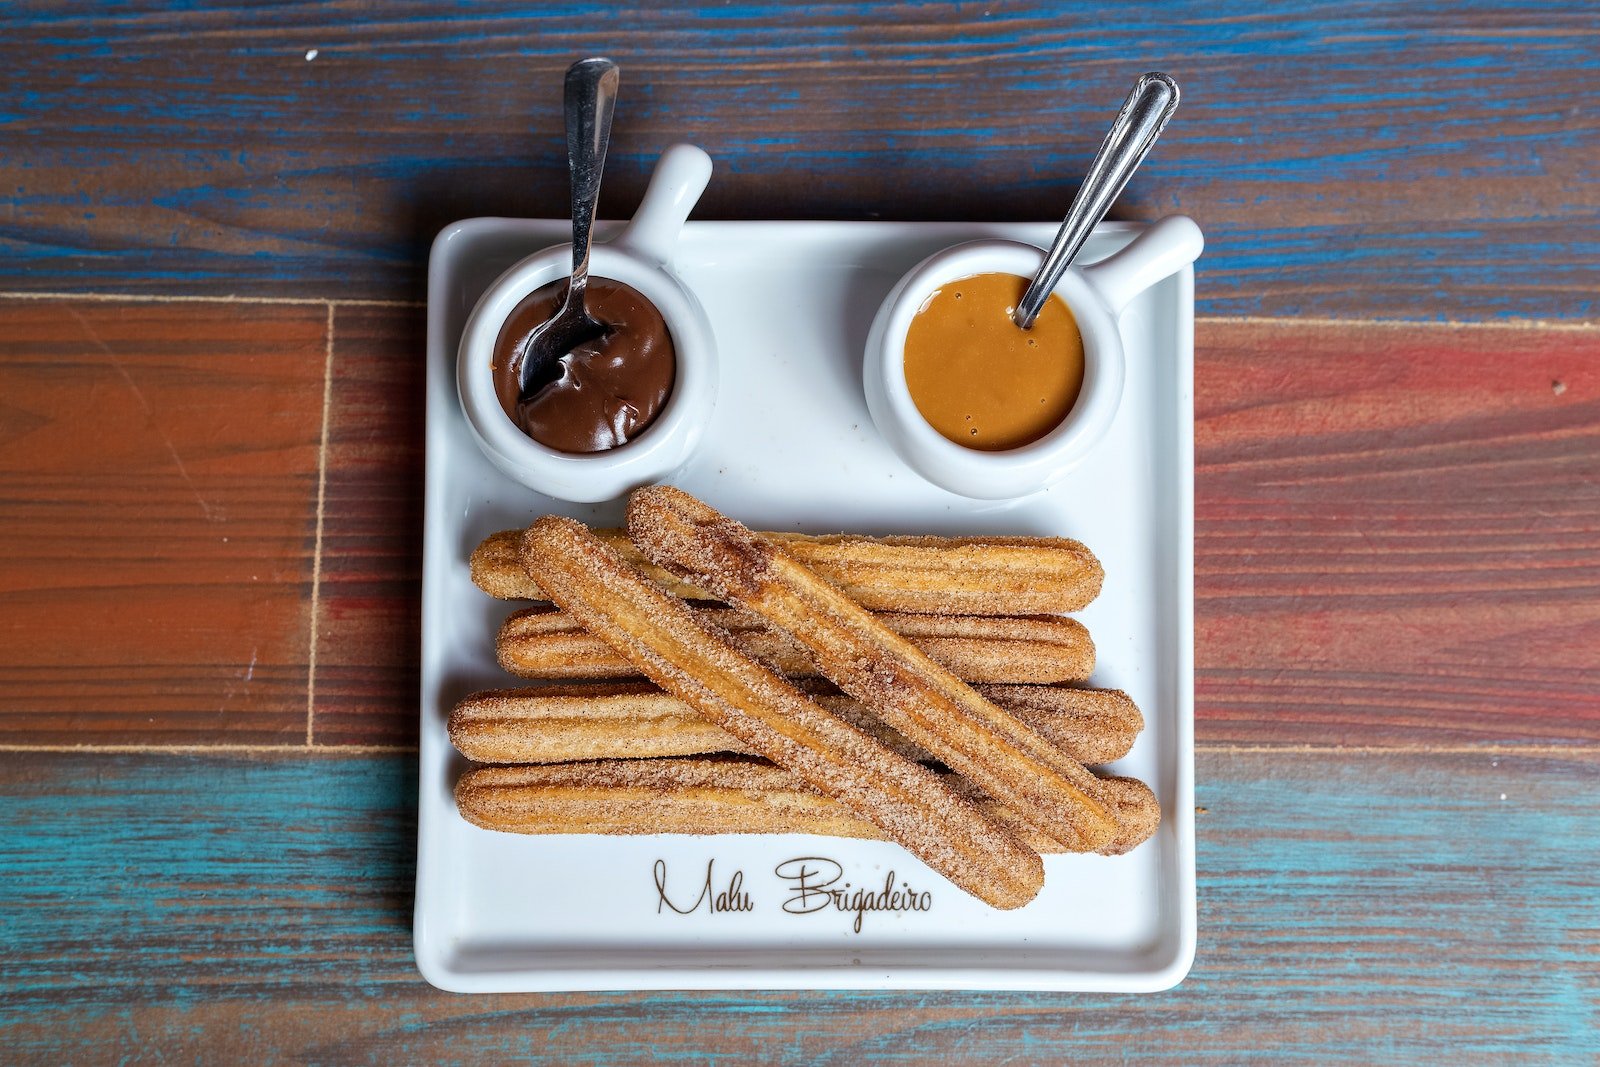 Churros with Chocolate and Dulce de leche Dips